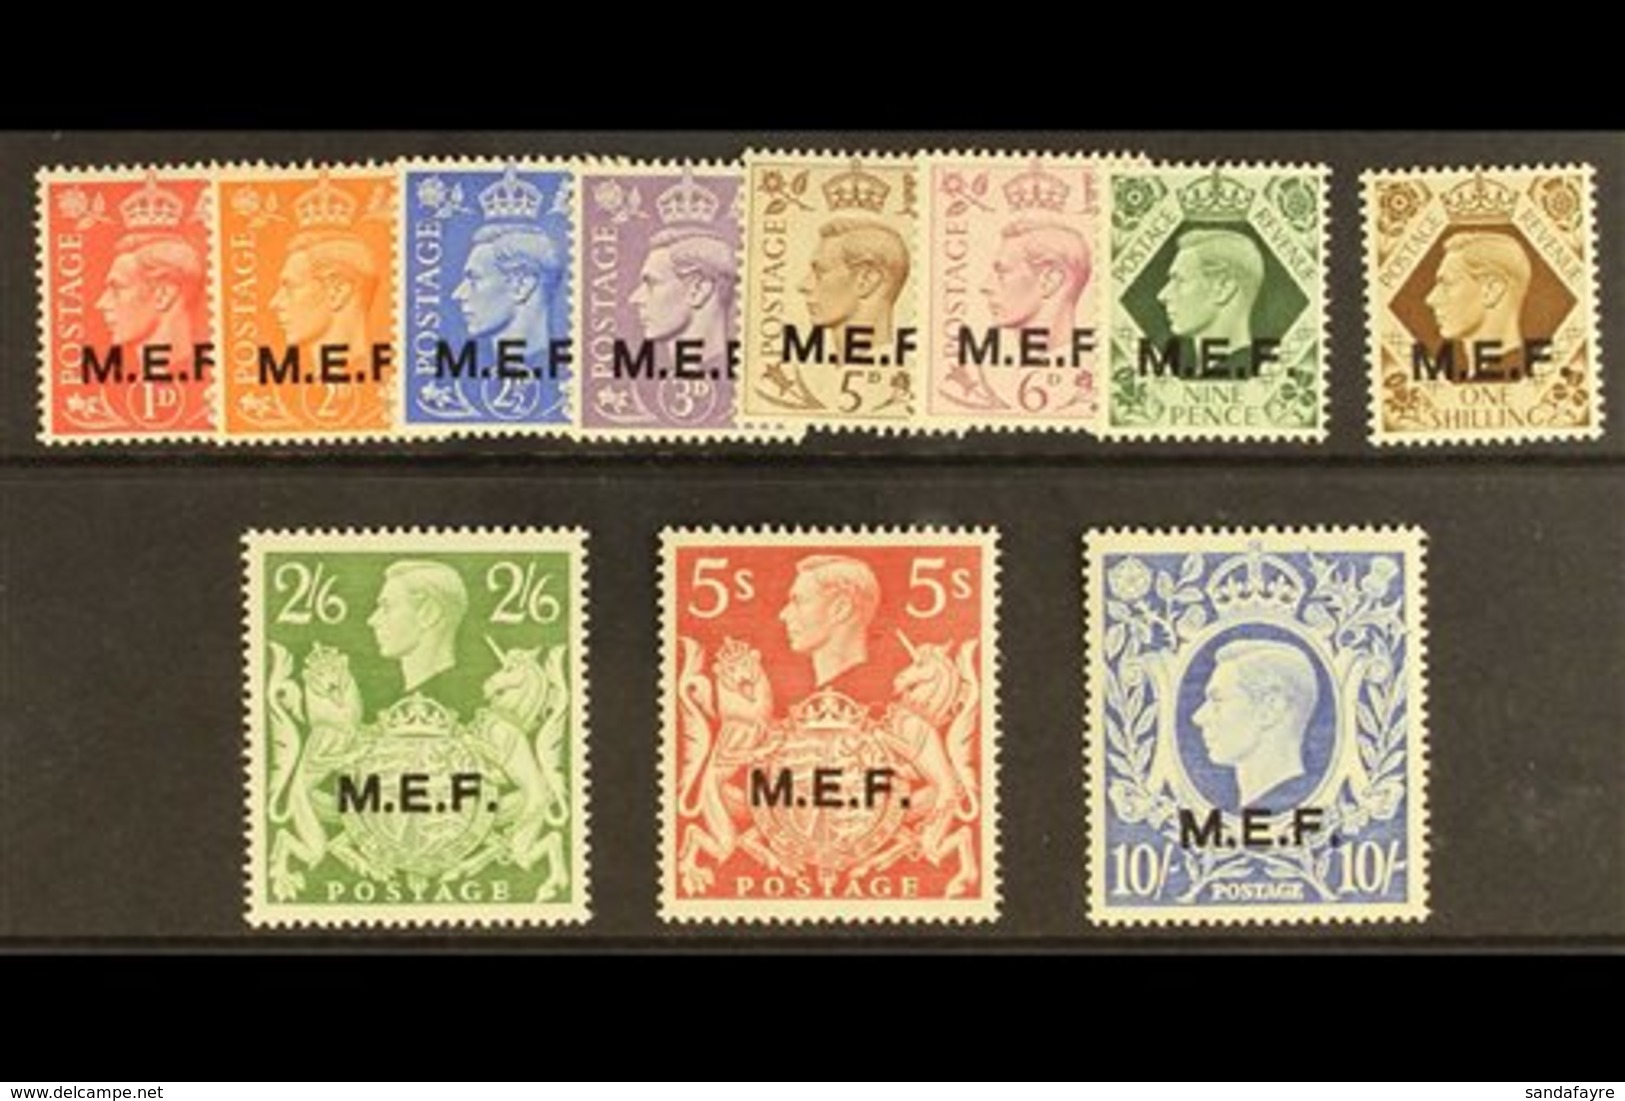 MIDDLE EAST FORCES  1943-47 "M.E.F." Overprints Complete Set, SG M11/M21, Never Hinged Mint. (11 Stamps) For More Images - Italienisch Ost-Afrika